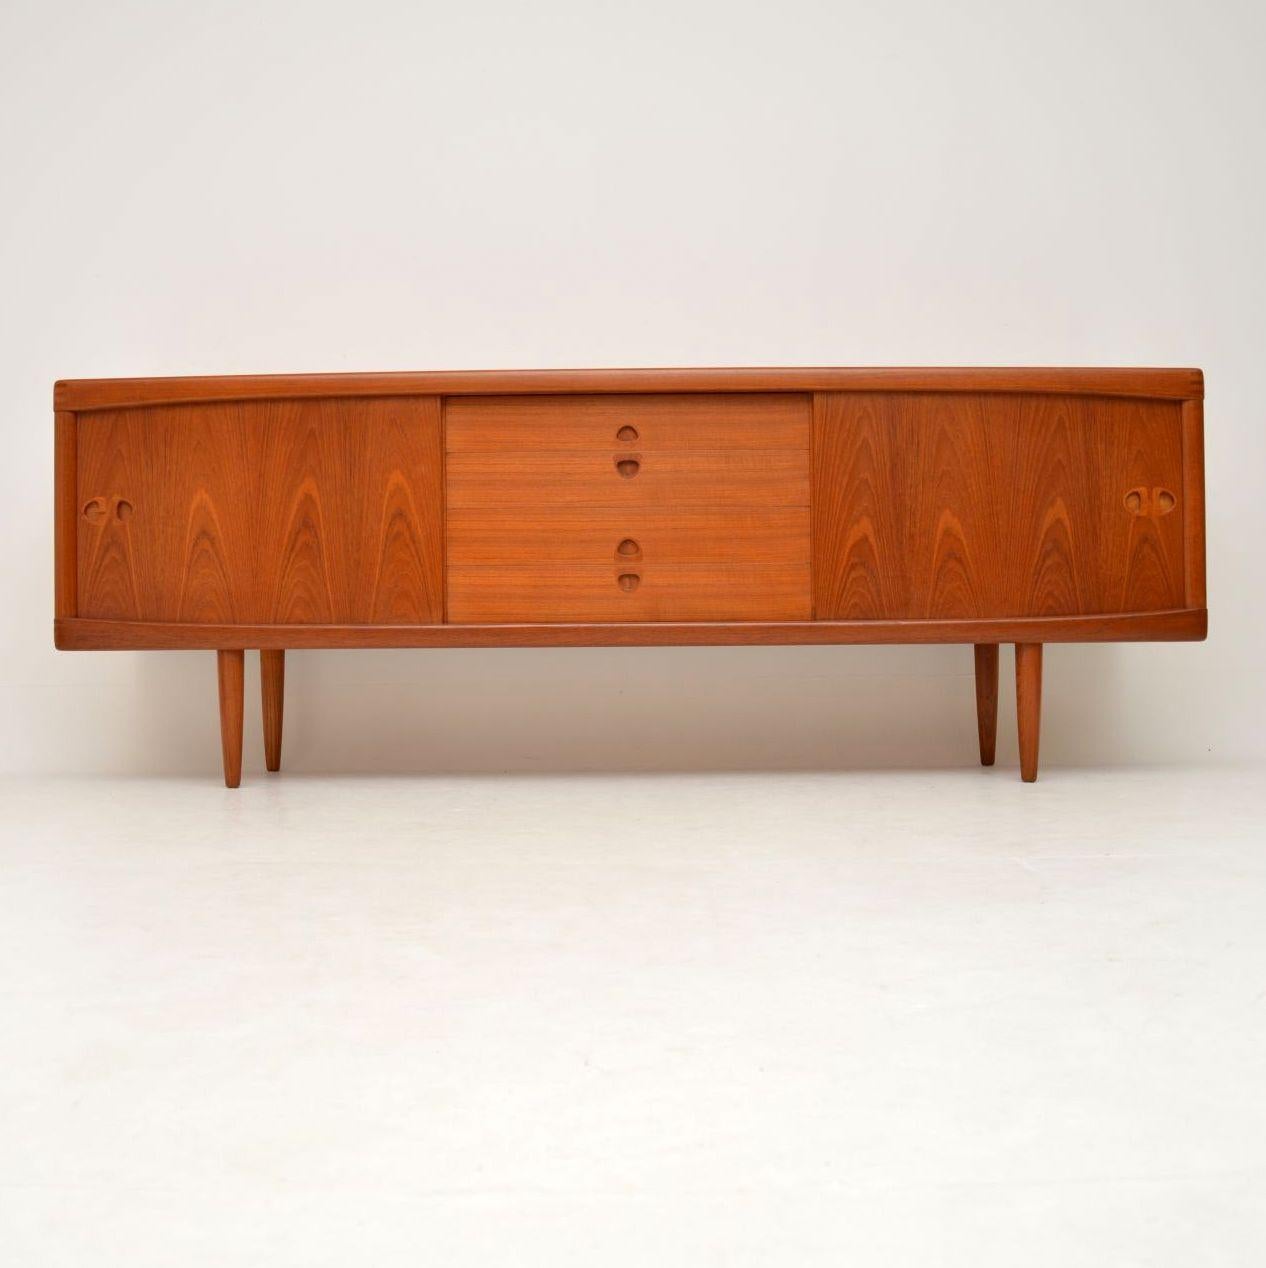 A stunning vintage Danish sideboard in teak, this was designed by HW Klein and was made by Bramin in the 1960s. We have had this stripped and re-polished to a very high standard, the condition is immaculate throughout. There are lots of beautiful